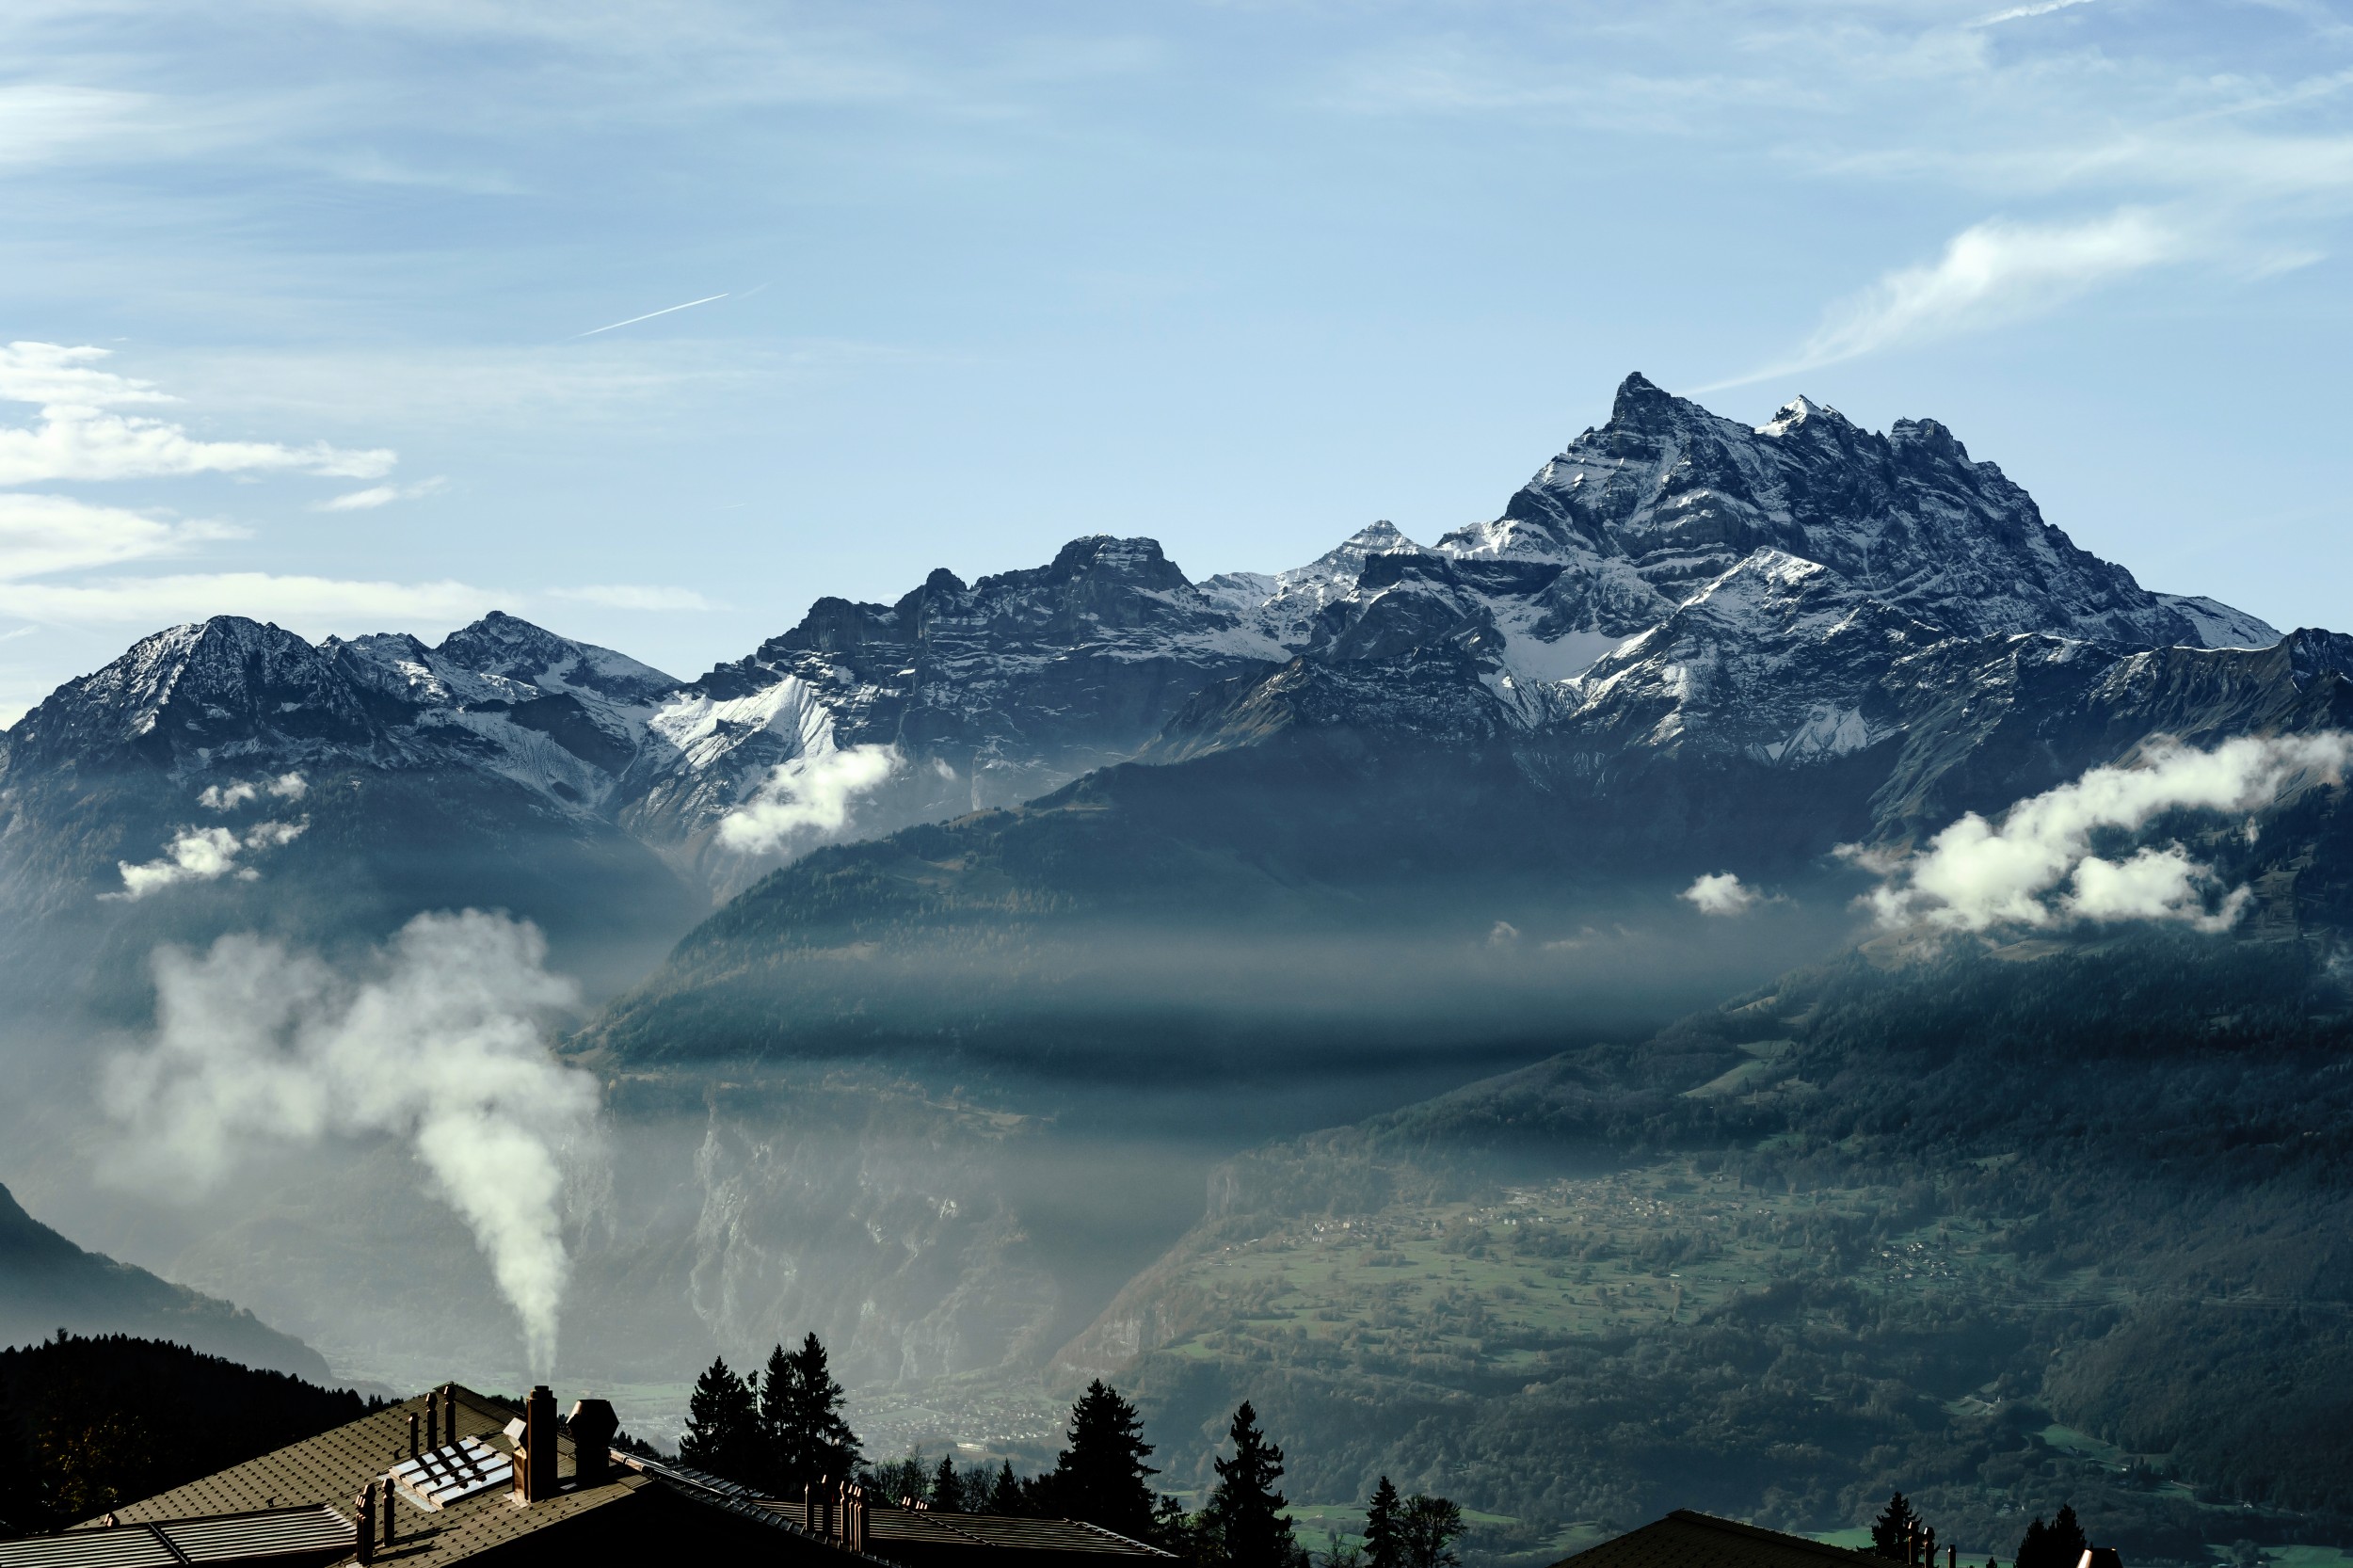 Wood-fired heating systems can cause considerable air quality pollution in Alpine valleys.